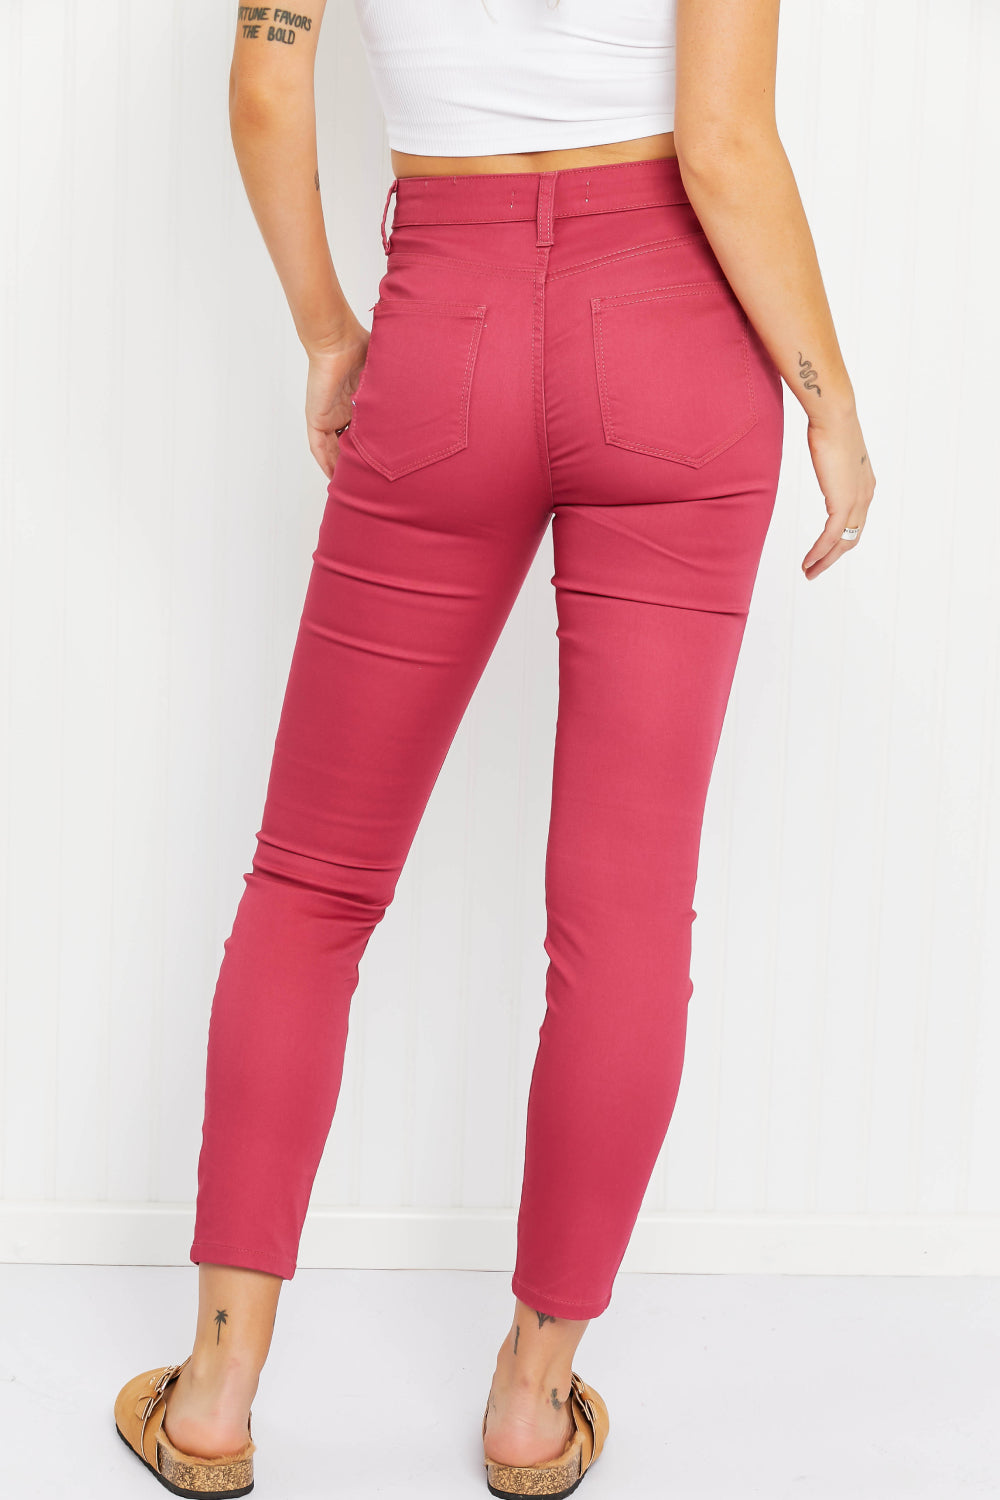 Walk the Line Full Size High Rise Skinny Jeans in Rose